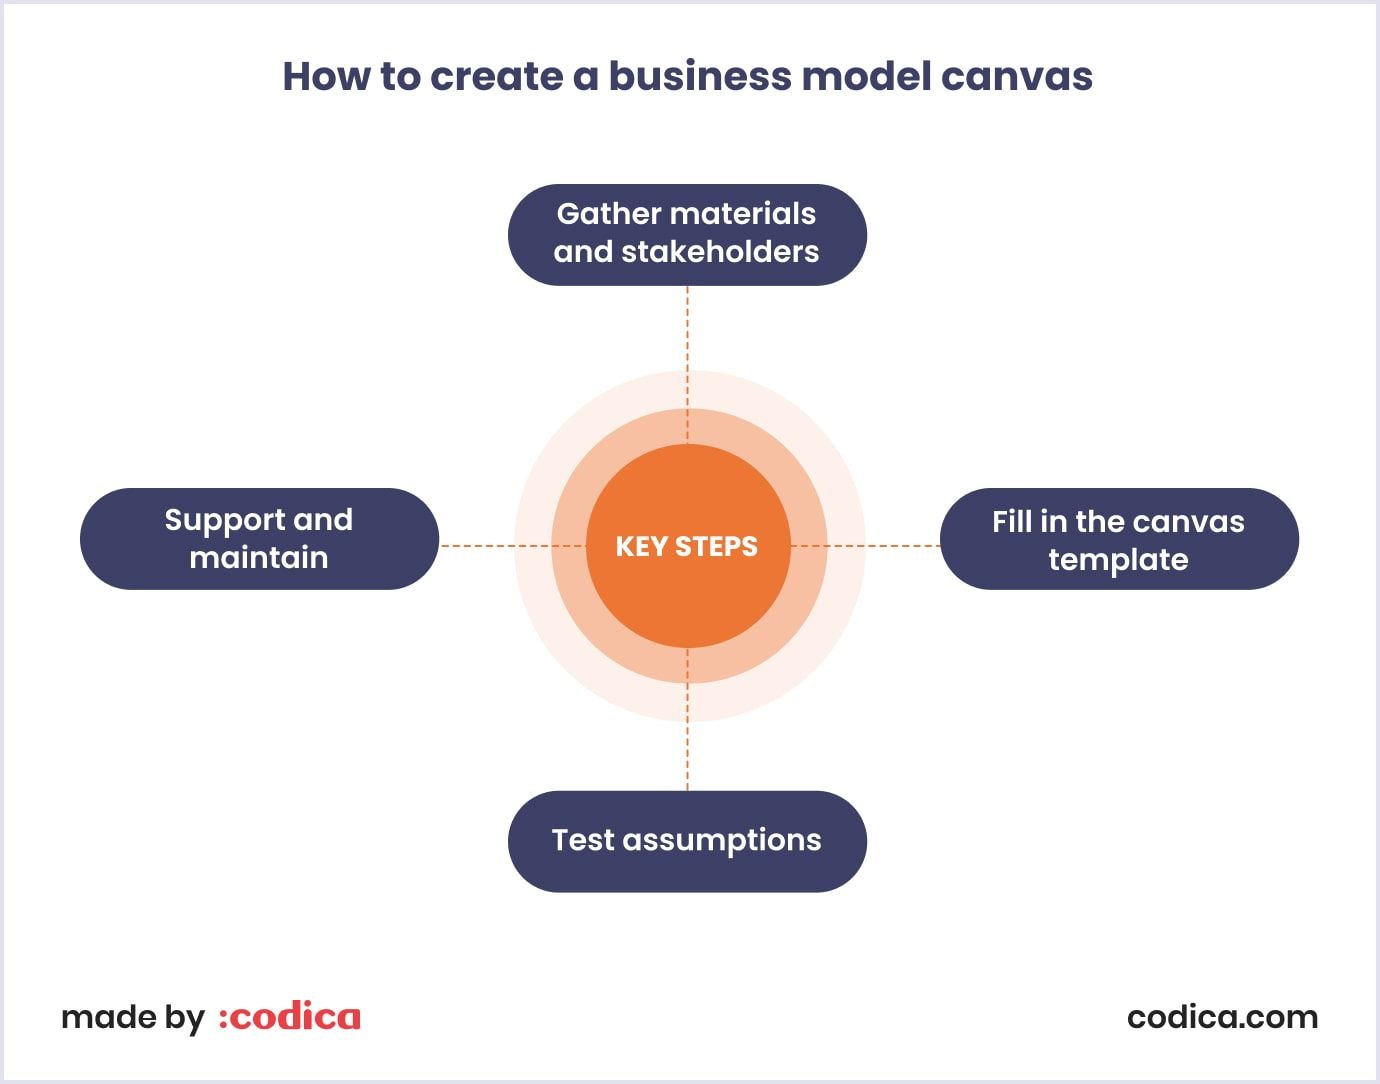 Key steps to create a business model canvas